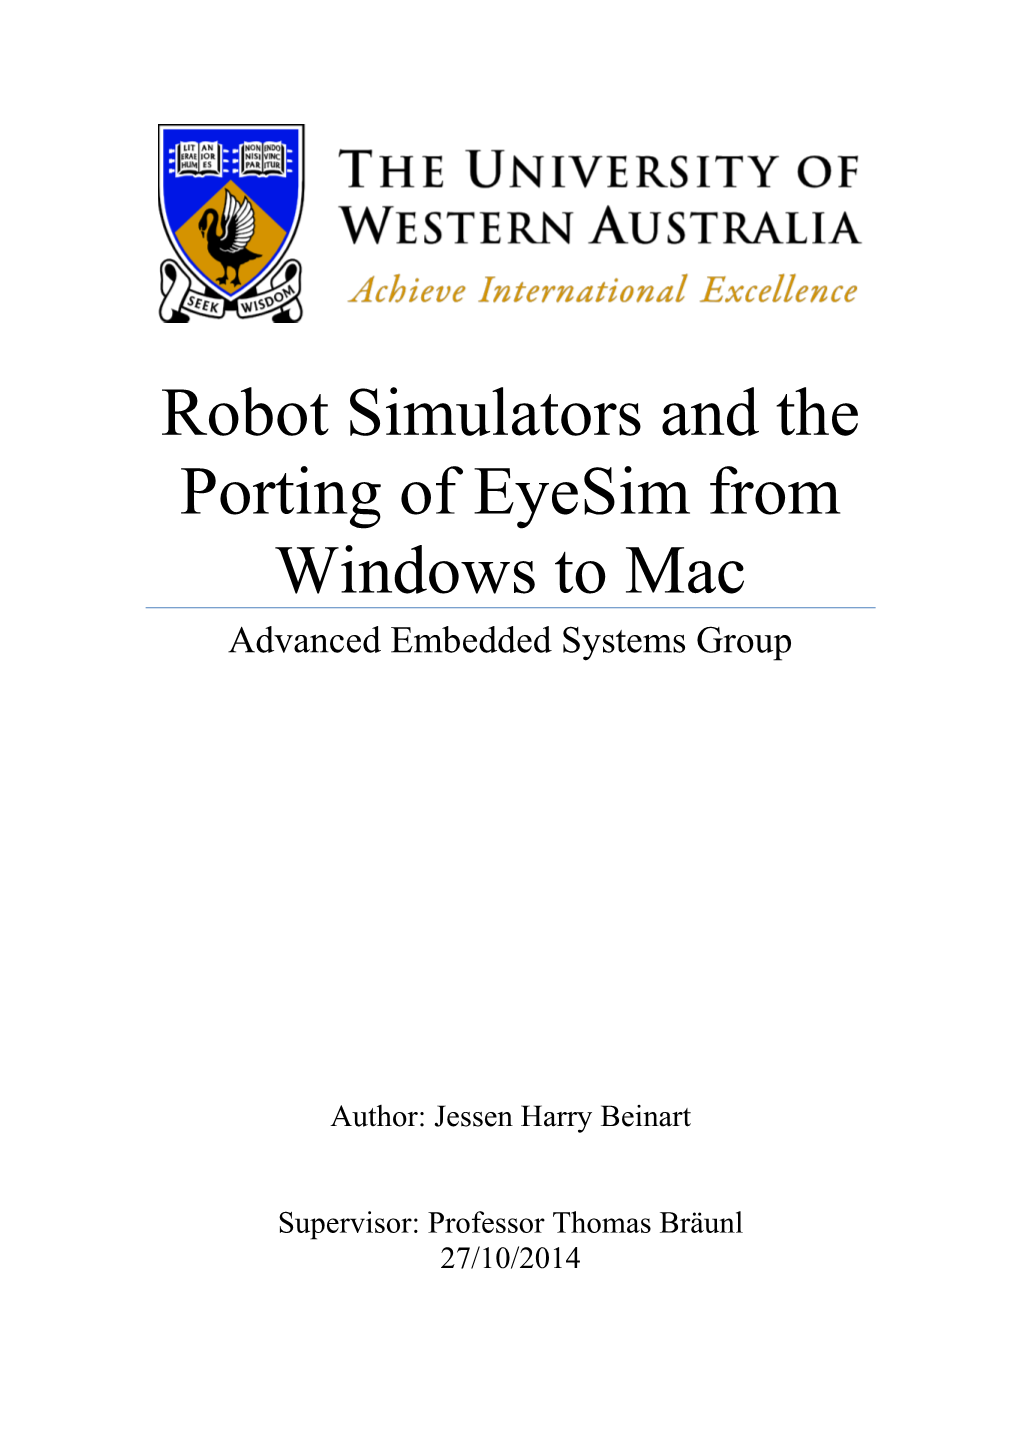 Robot Simulators and the Porting of Eyesim from Windows to Mac Advanced Embedded Systems Group